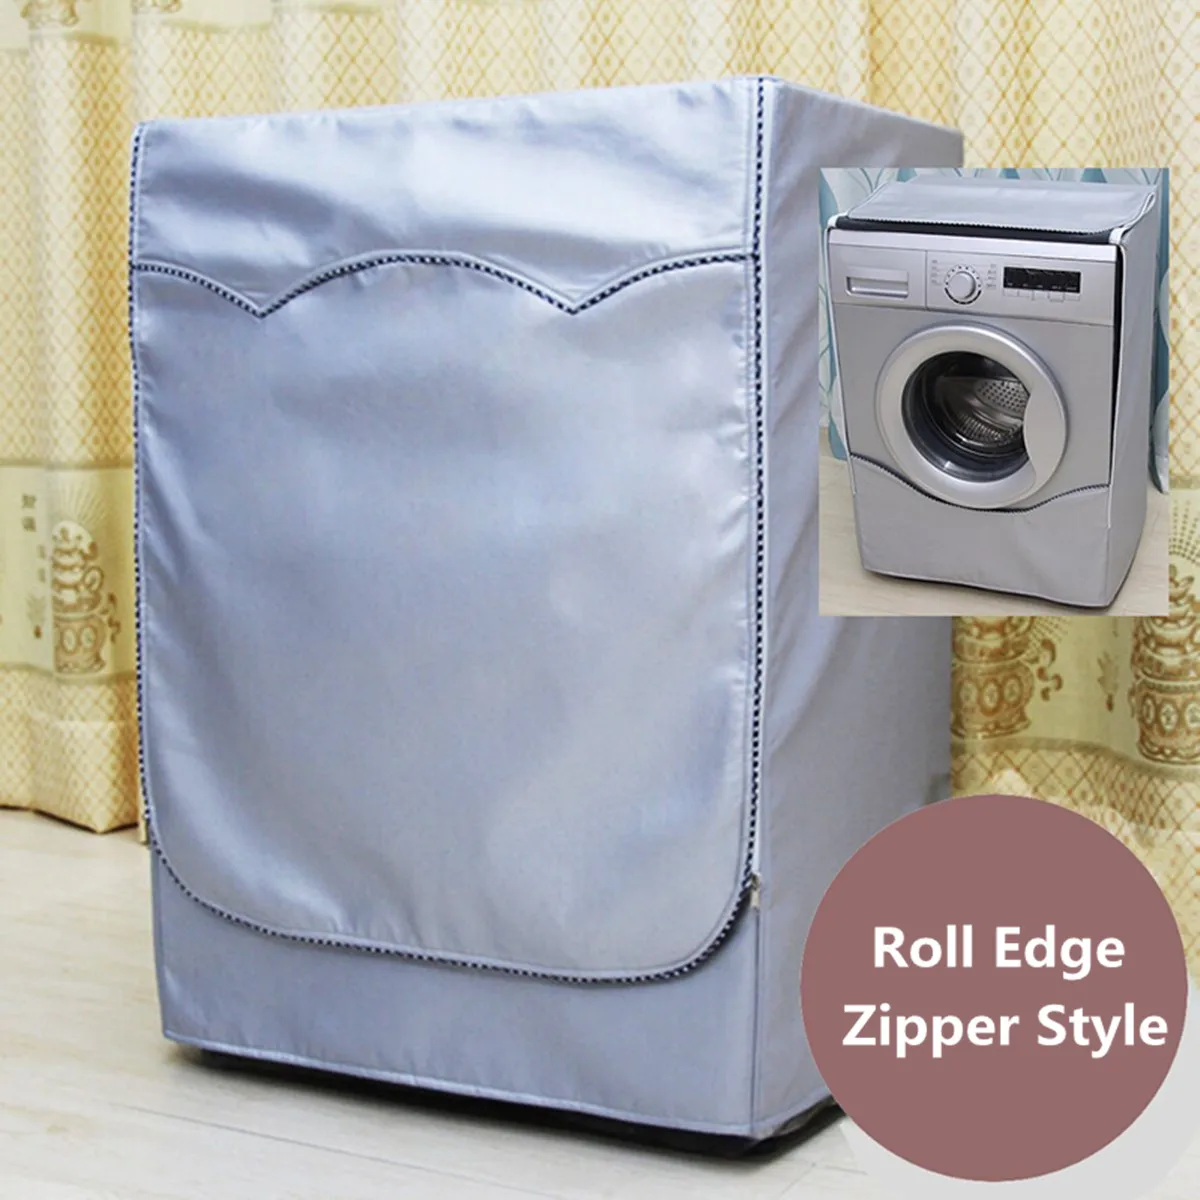 Coated Top Cover Washer Washing Machine Portective Dry Cover Gold Zip XL 